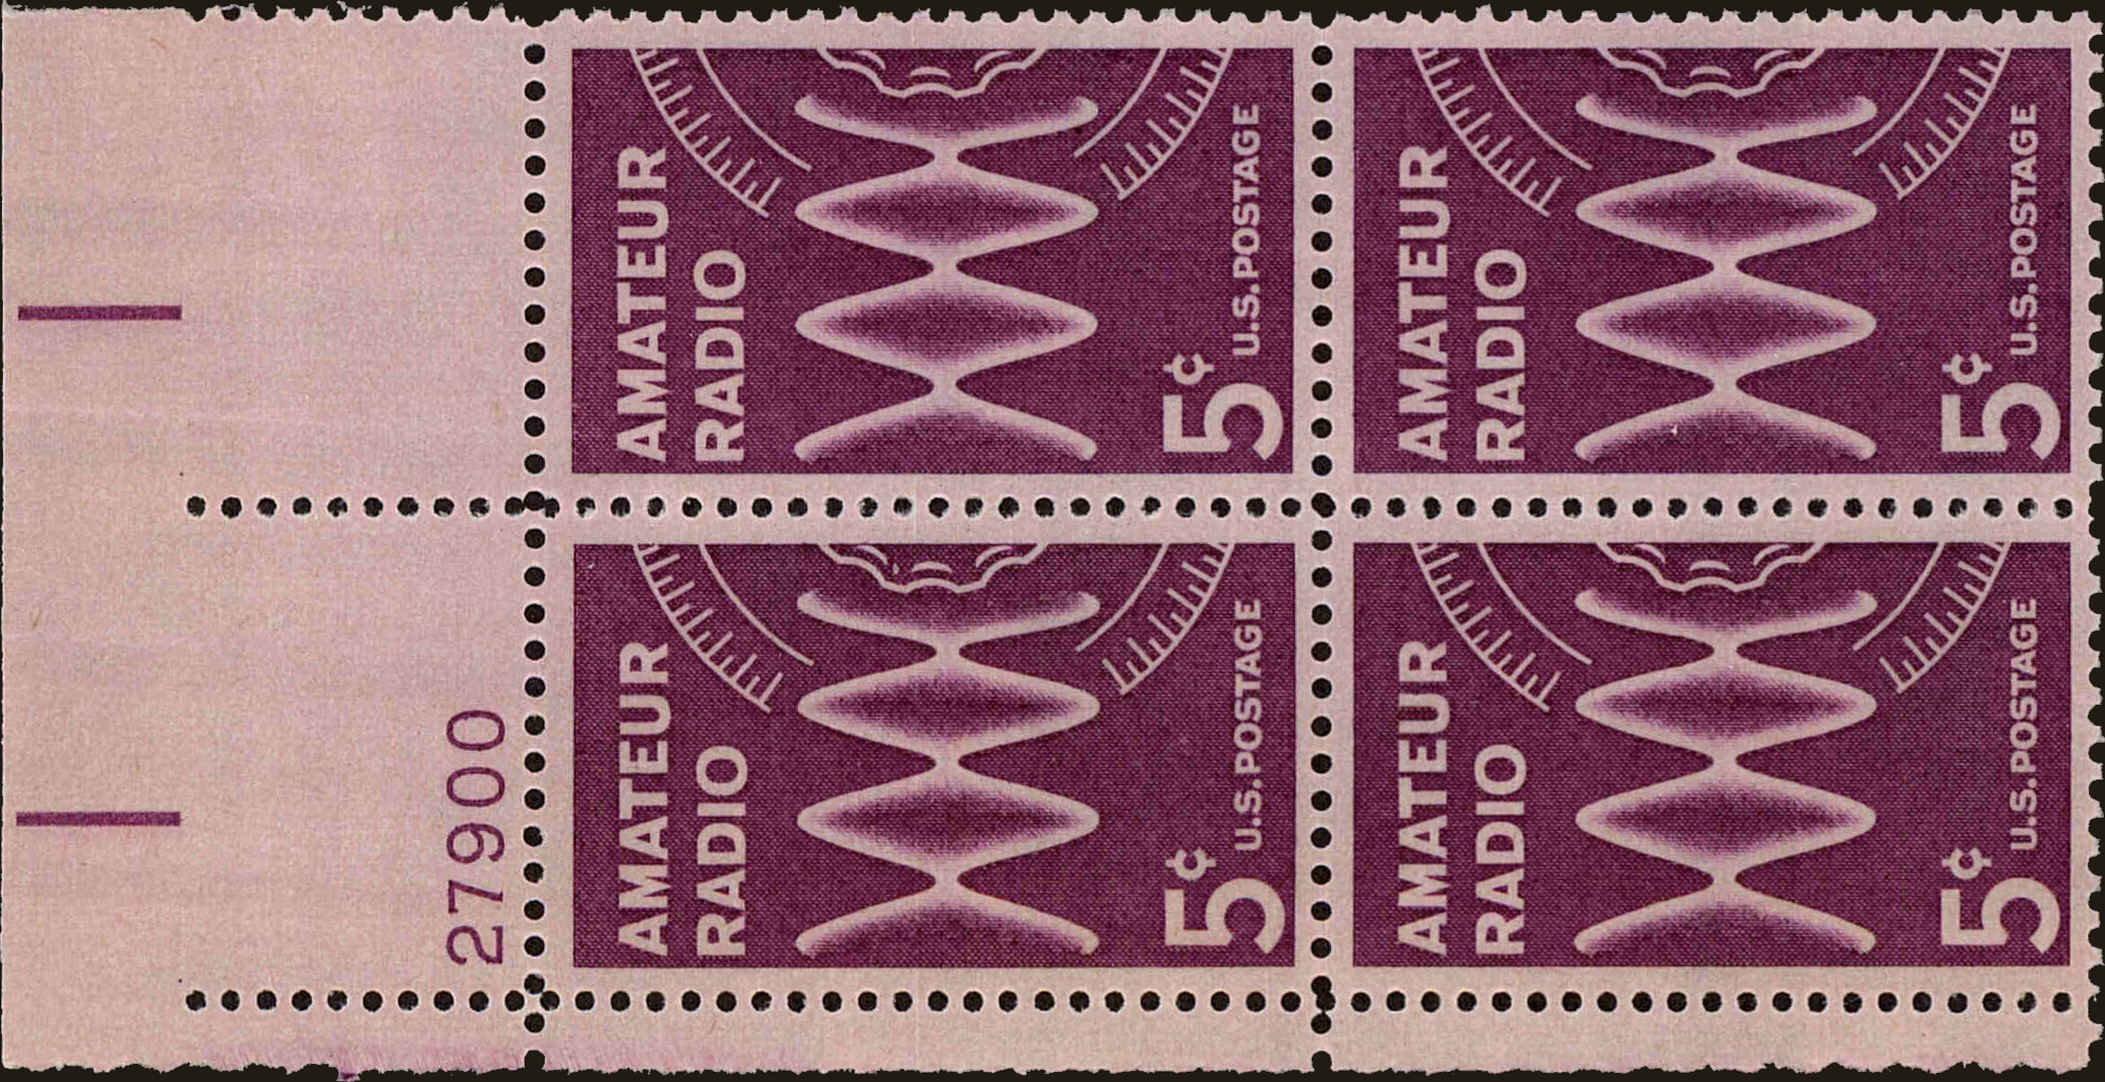 Front view of United States 1260 collectors stamp